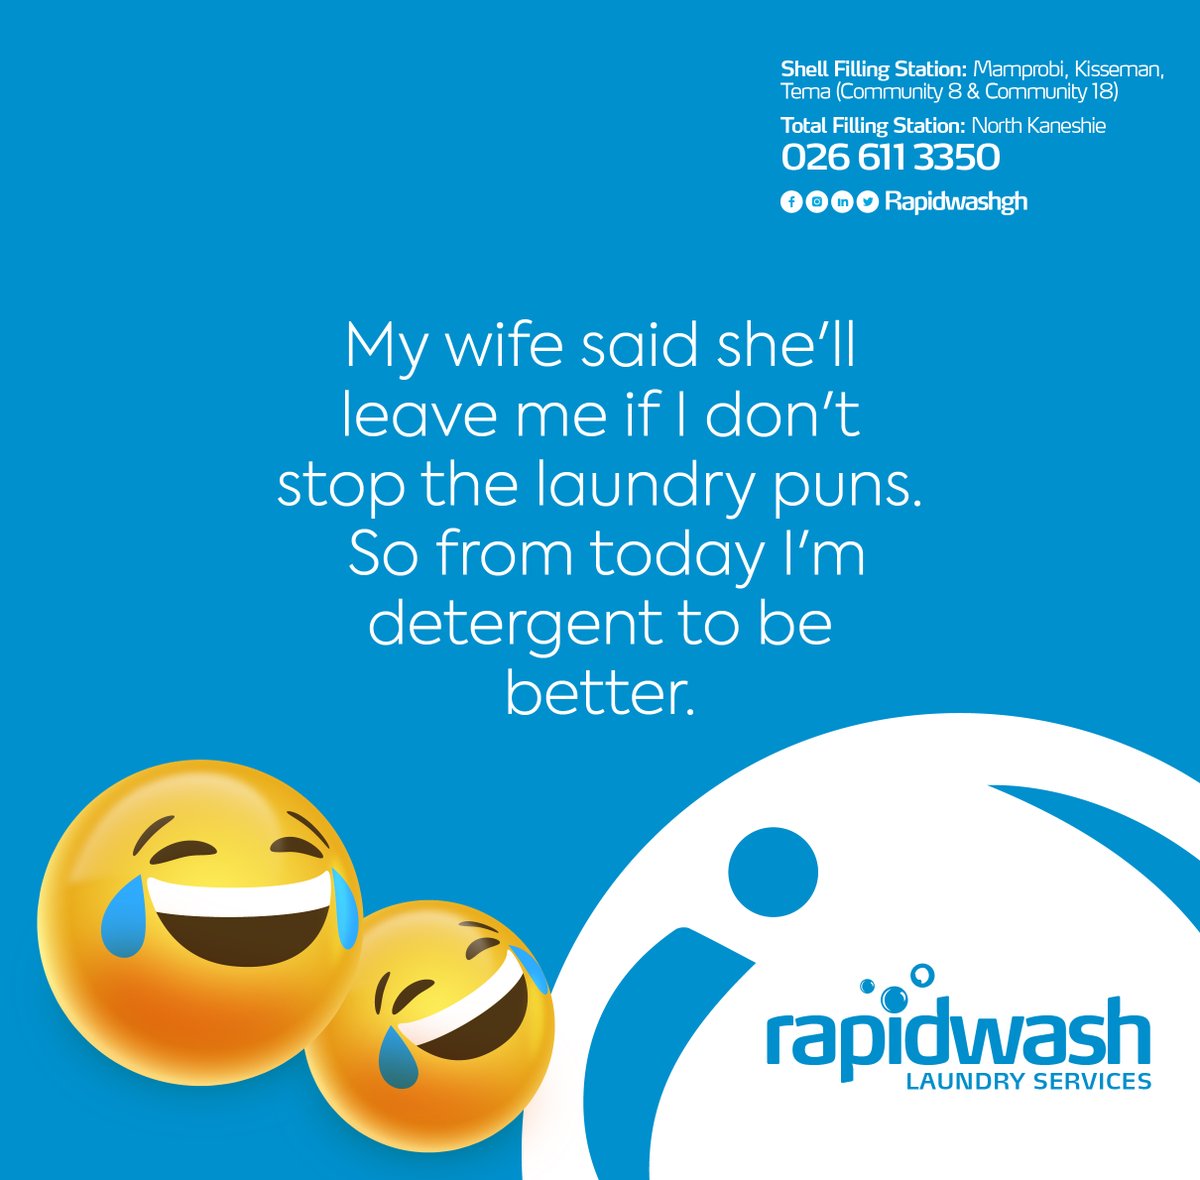 Wednesdays call for a little bit of puns to lighten up a busy week😂🤣

#Rapidwashgh #washmoreworryless #shellfillingstation #totalfillingstation #ghana #laundryservice #wednesdayvibes #affordable #convenient #nearyou